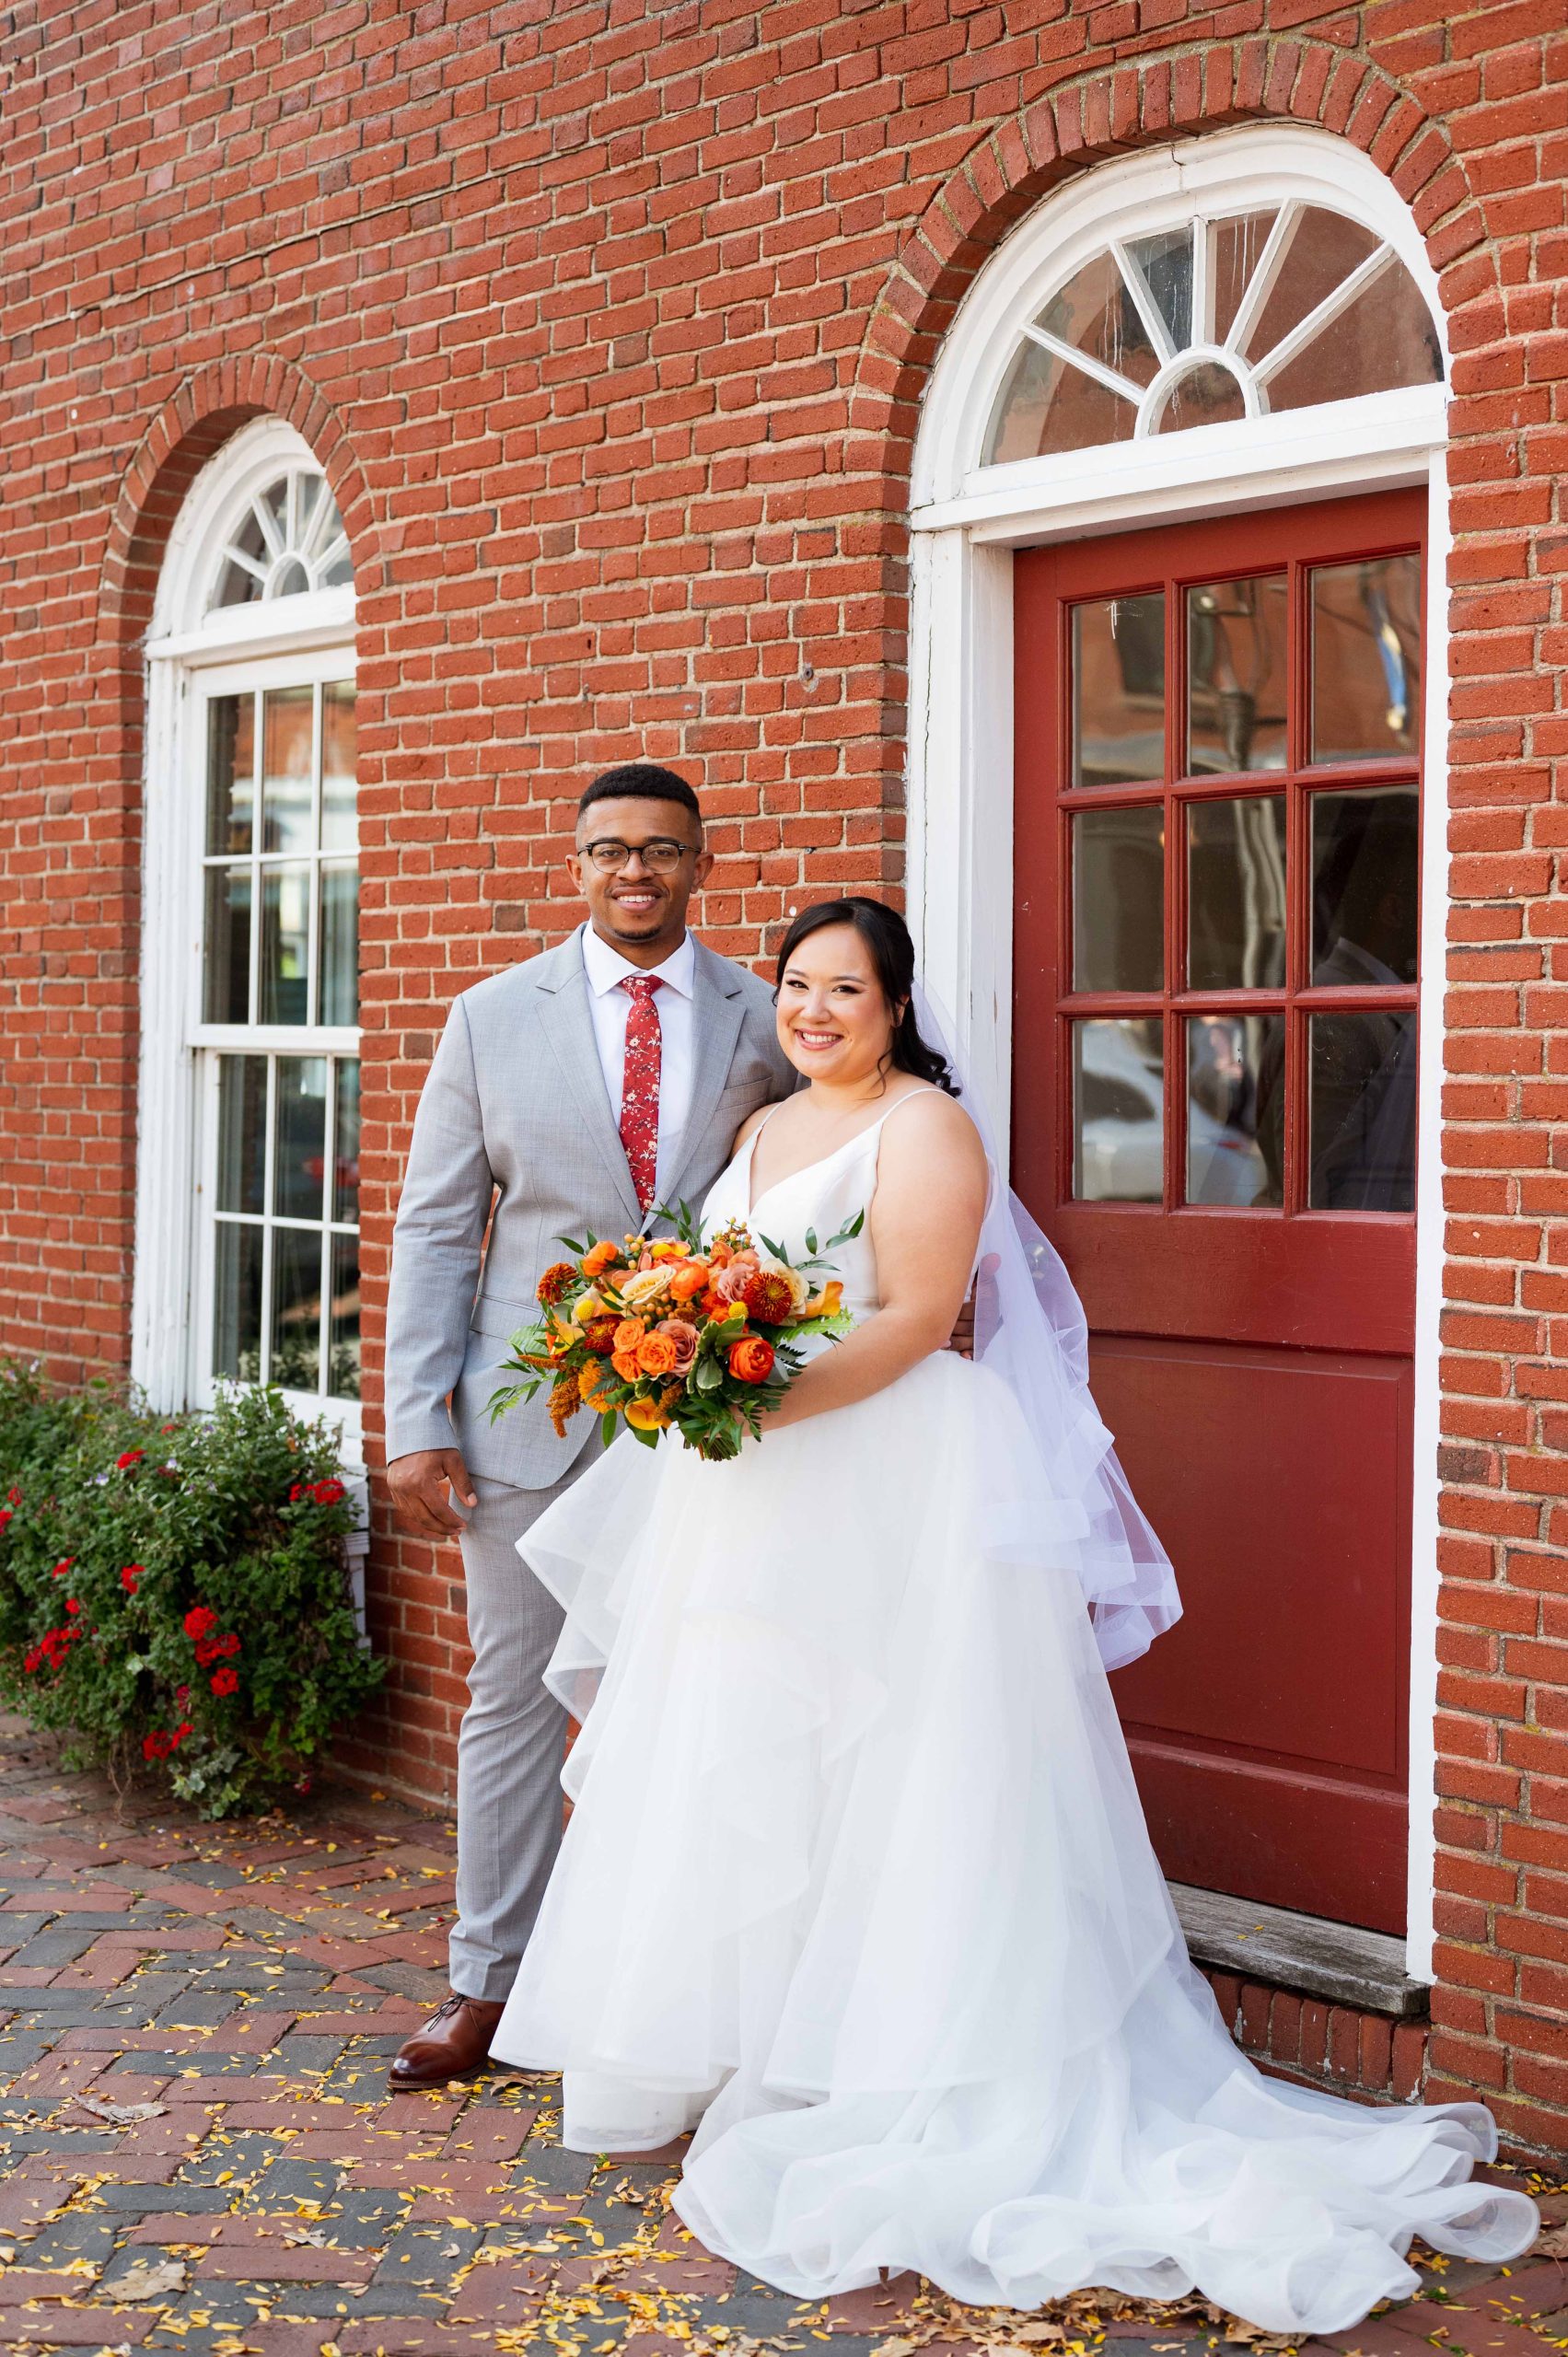 Bride and groom standing in front of a brick building.